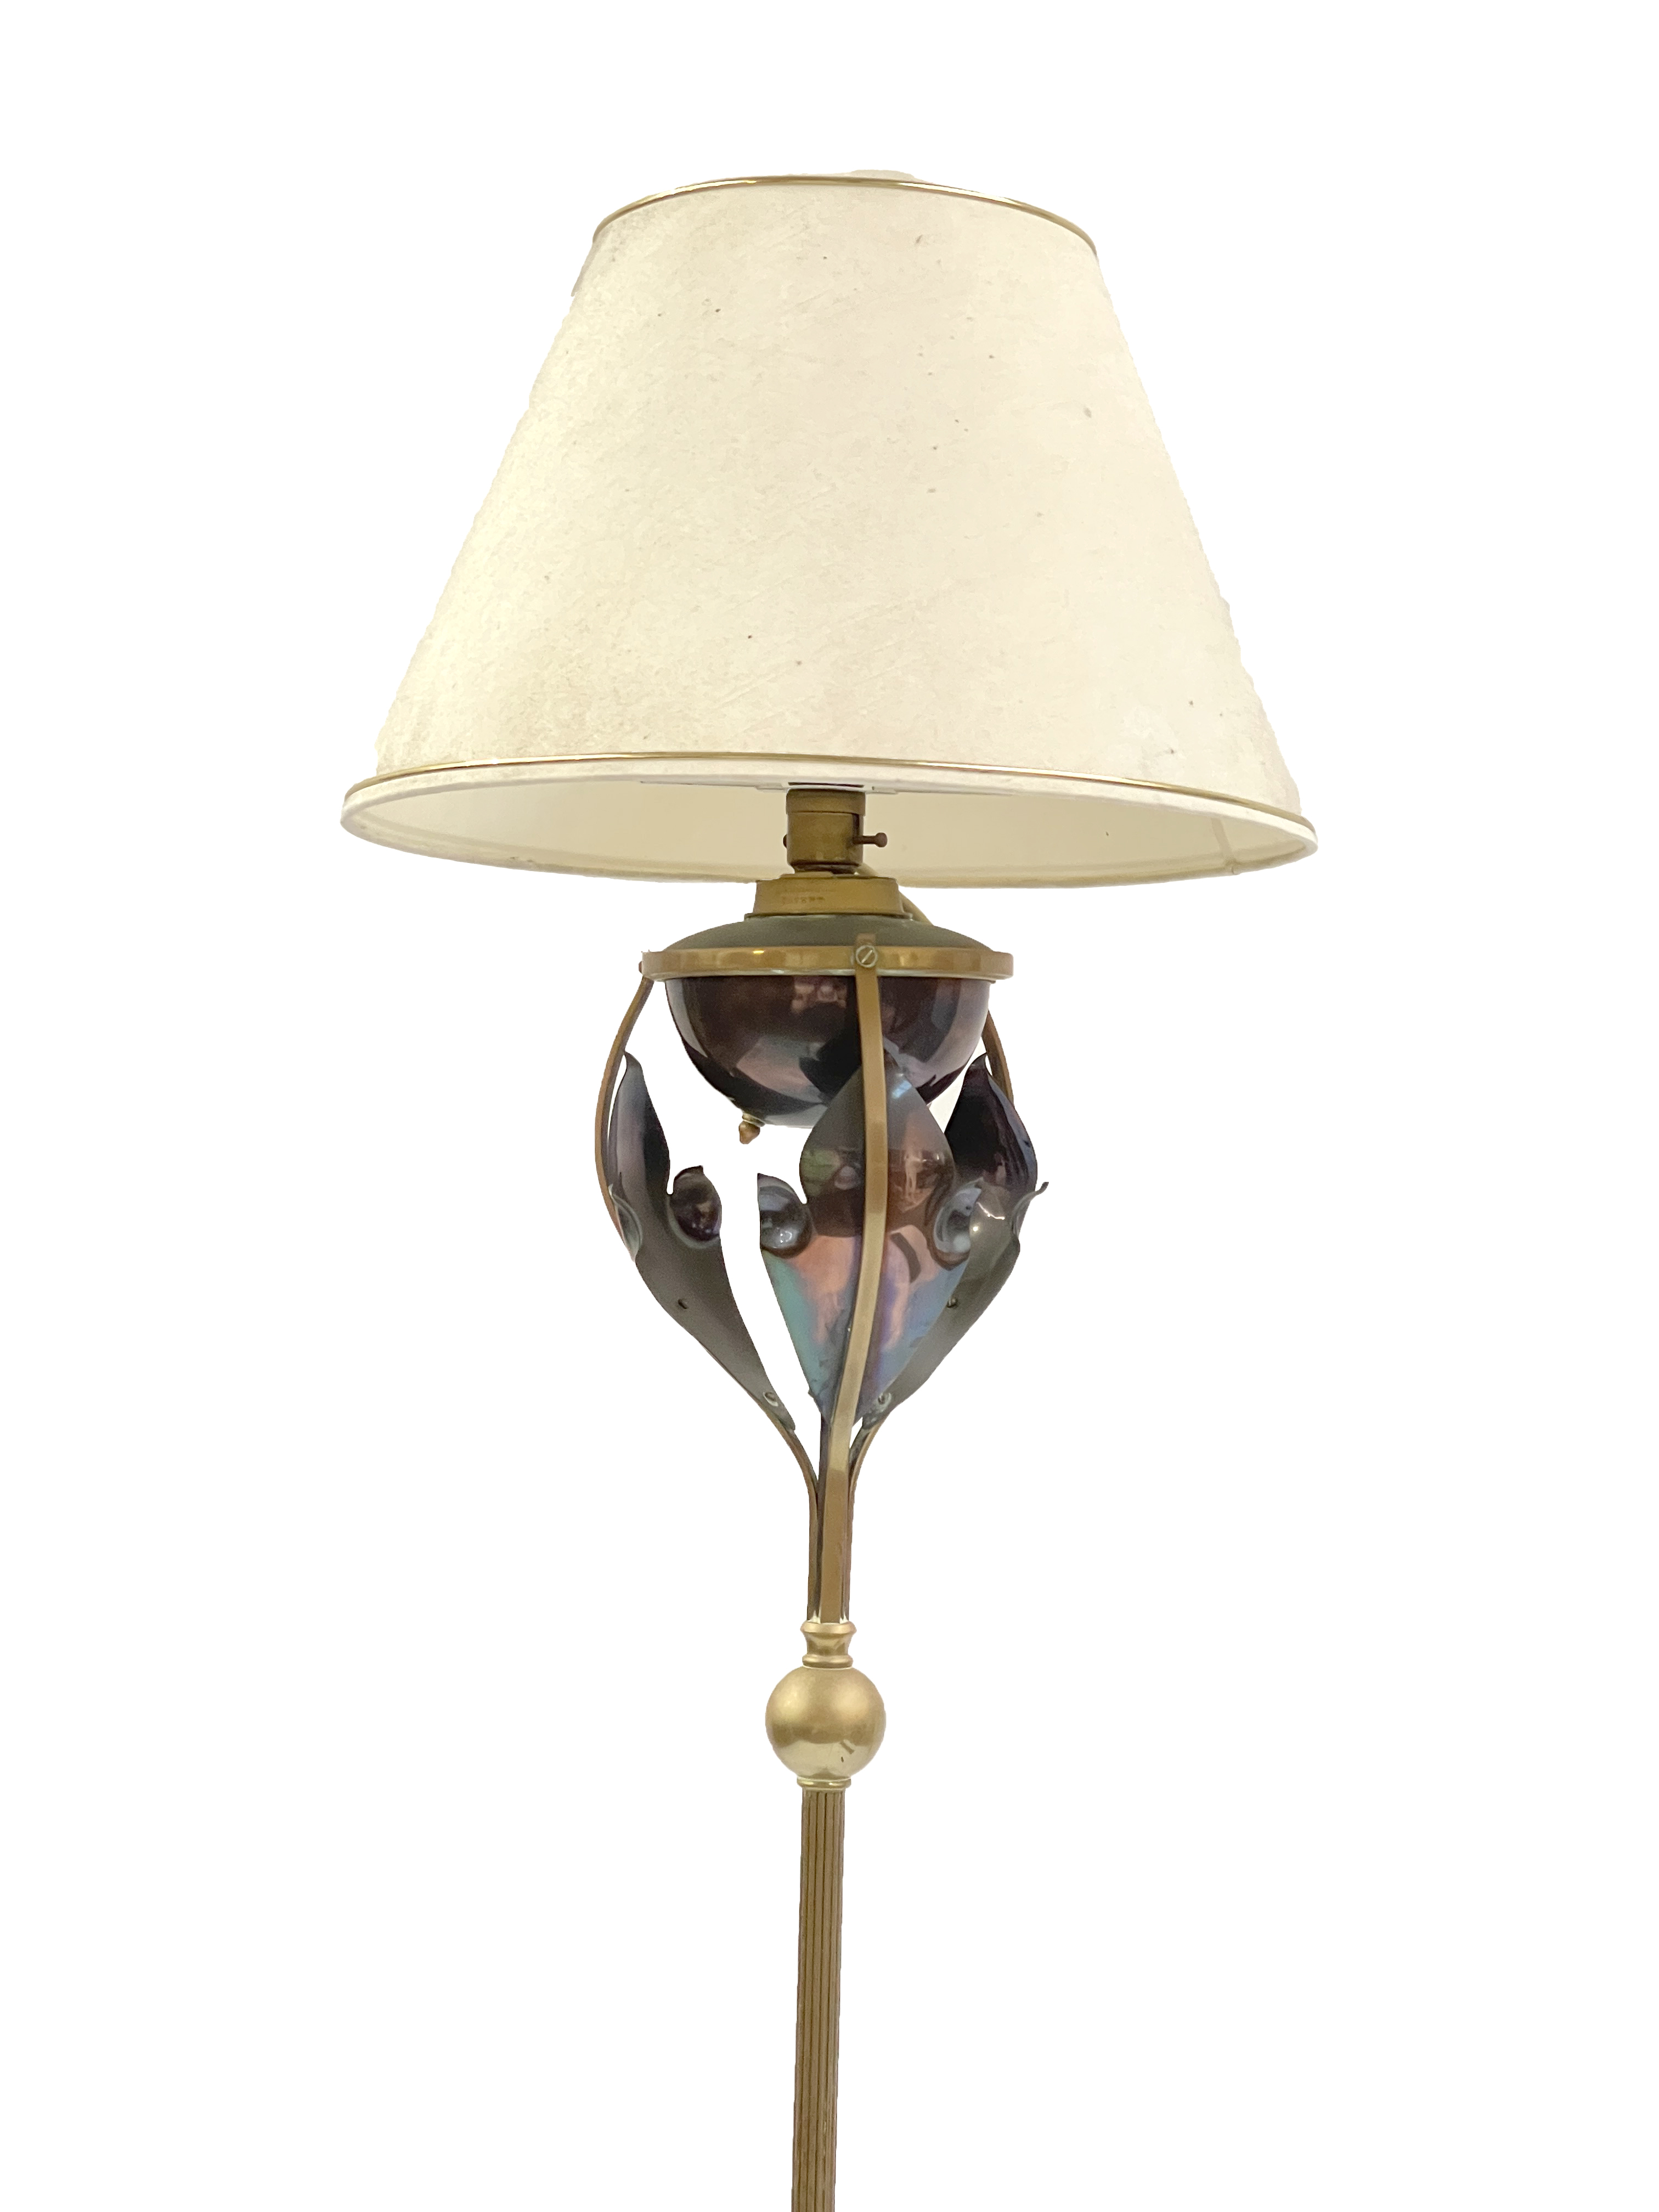 W A S Benson, an Arts and Crafts copper and brass floor standing lamp - Image 2 of 5